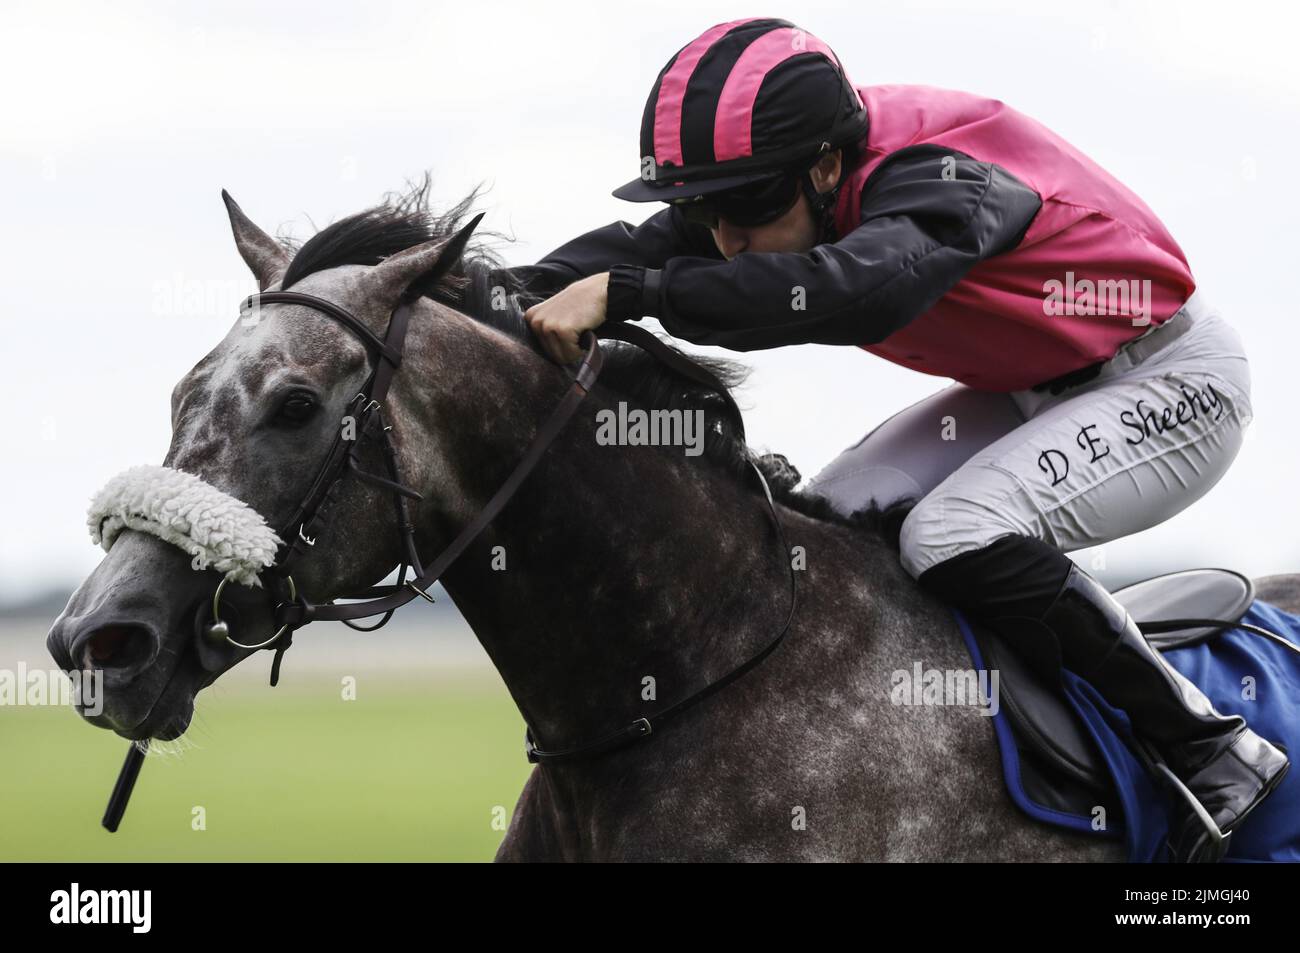 Danny Sheehy on Big Gossey wins the AK Bets Handicap at the Curragh Racecourse in County Kildare, Ireland. Picture date: Saturday August 6, 2022. Stock Photo